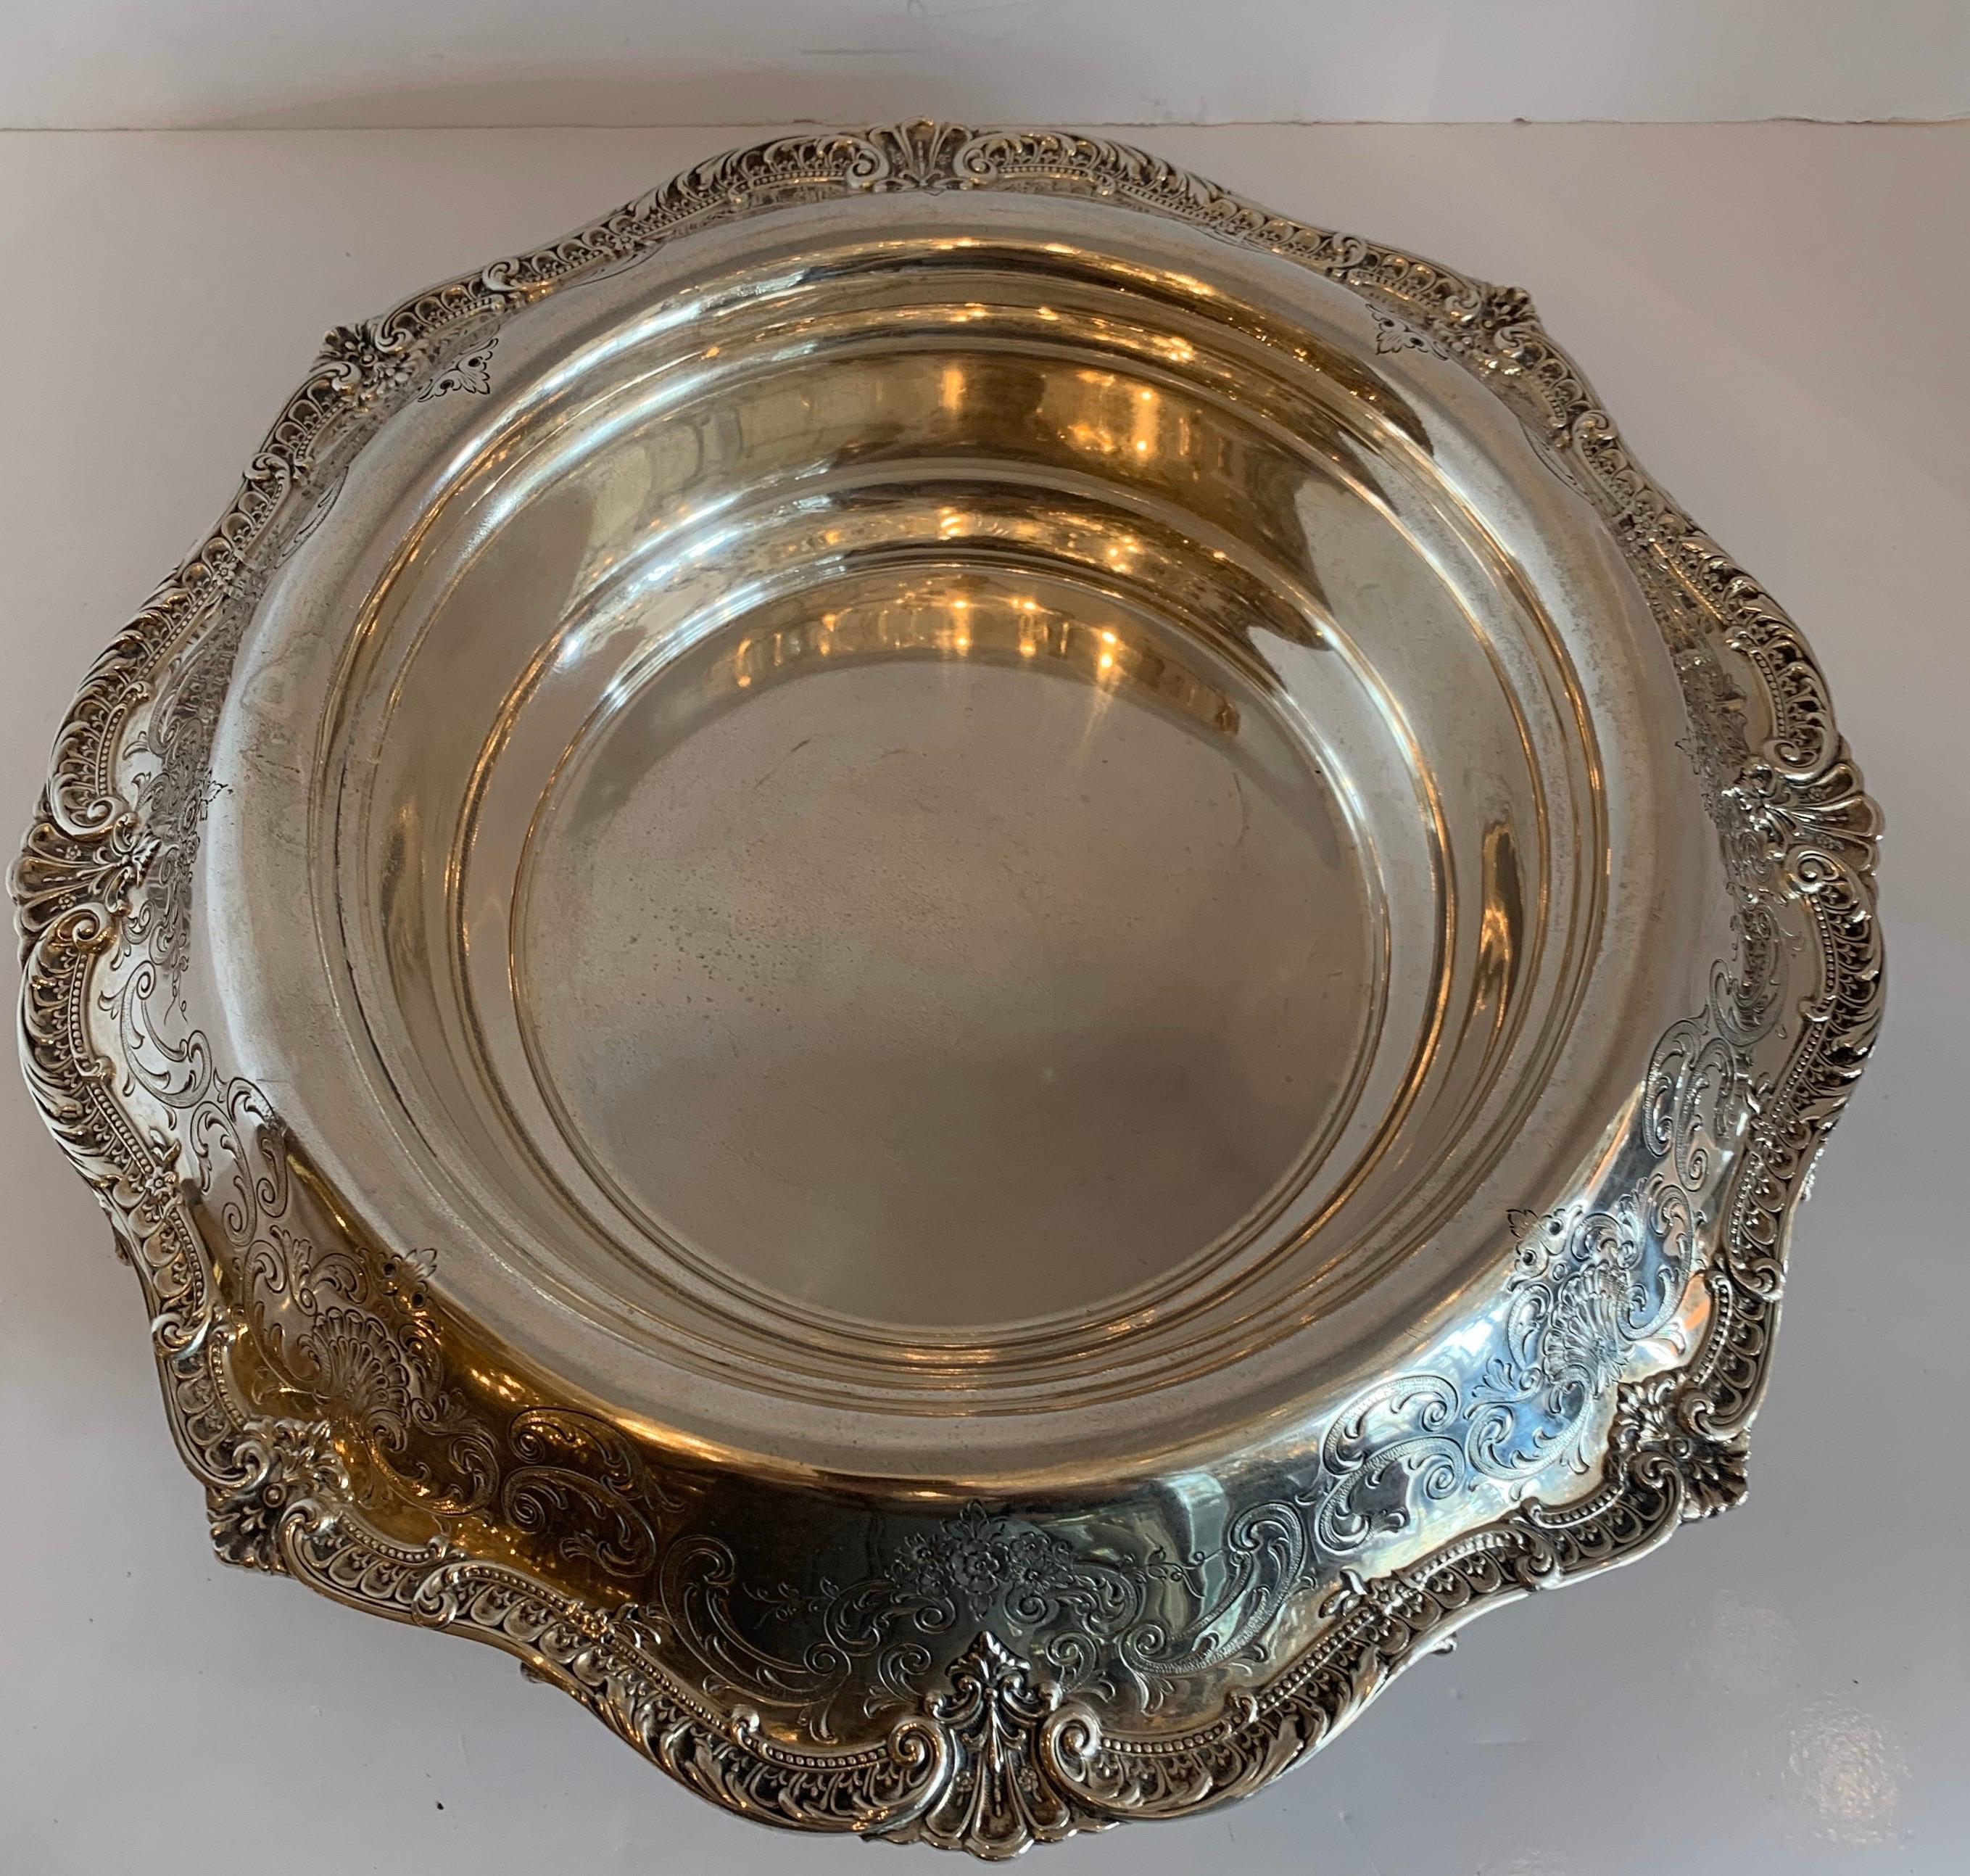 Hand-Crafted Wonderful Large Sterling Silver Spaulding & Co. Hand Chased Centerpiece Bowl